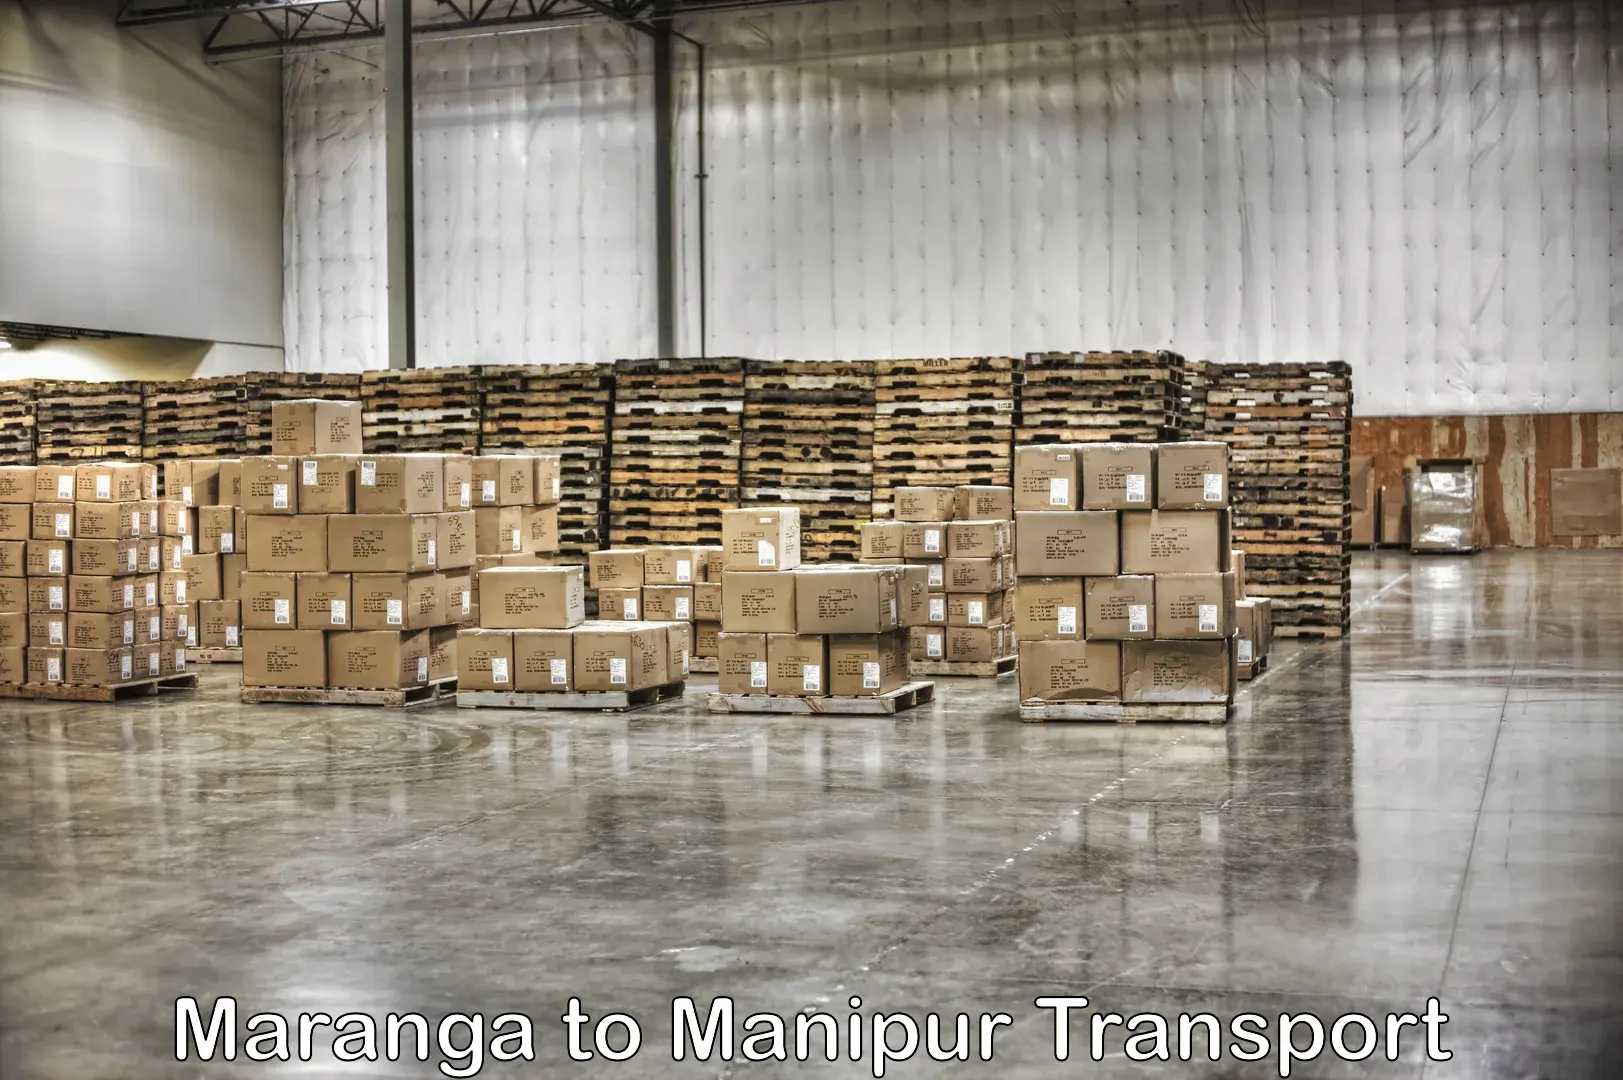 Delivery service Maranga to Manipur